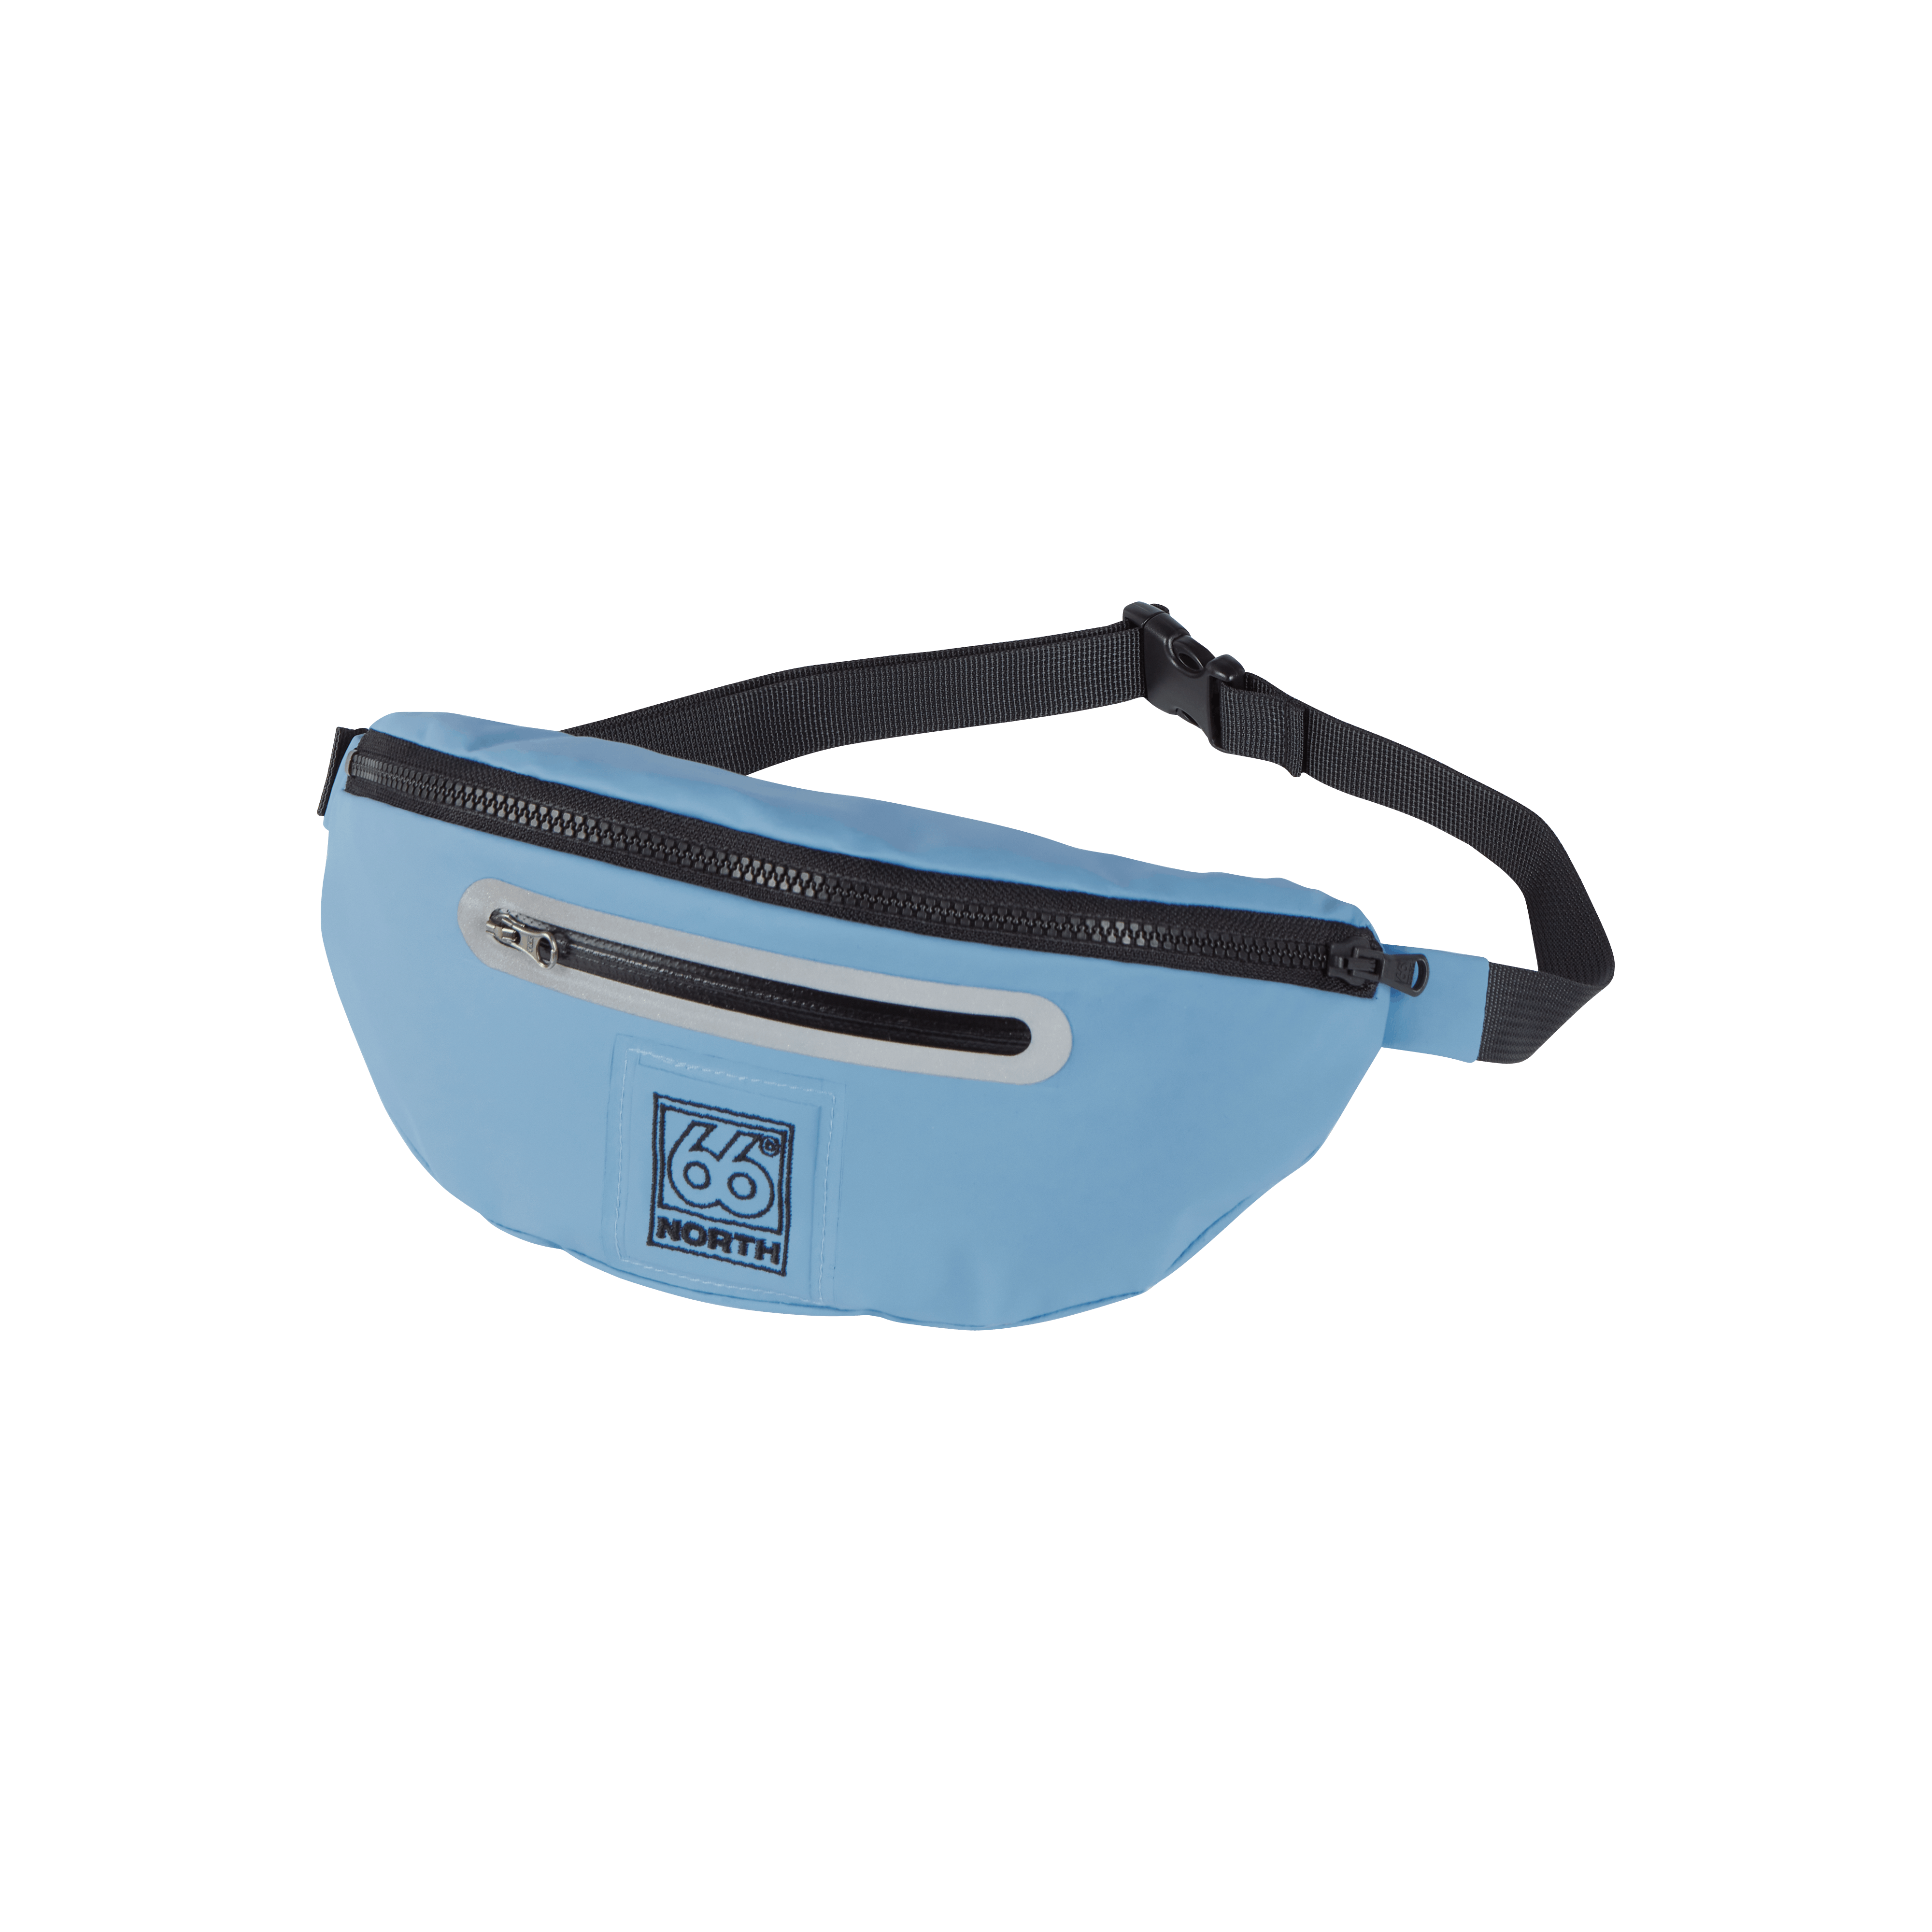 66 North Womens Bum Bag Accessories - Blue - One Size